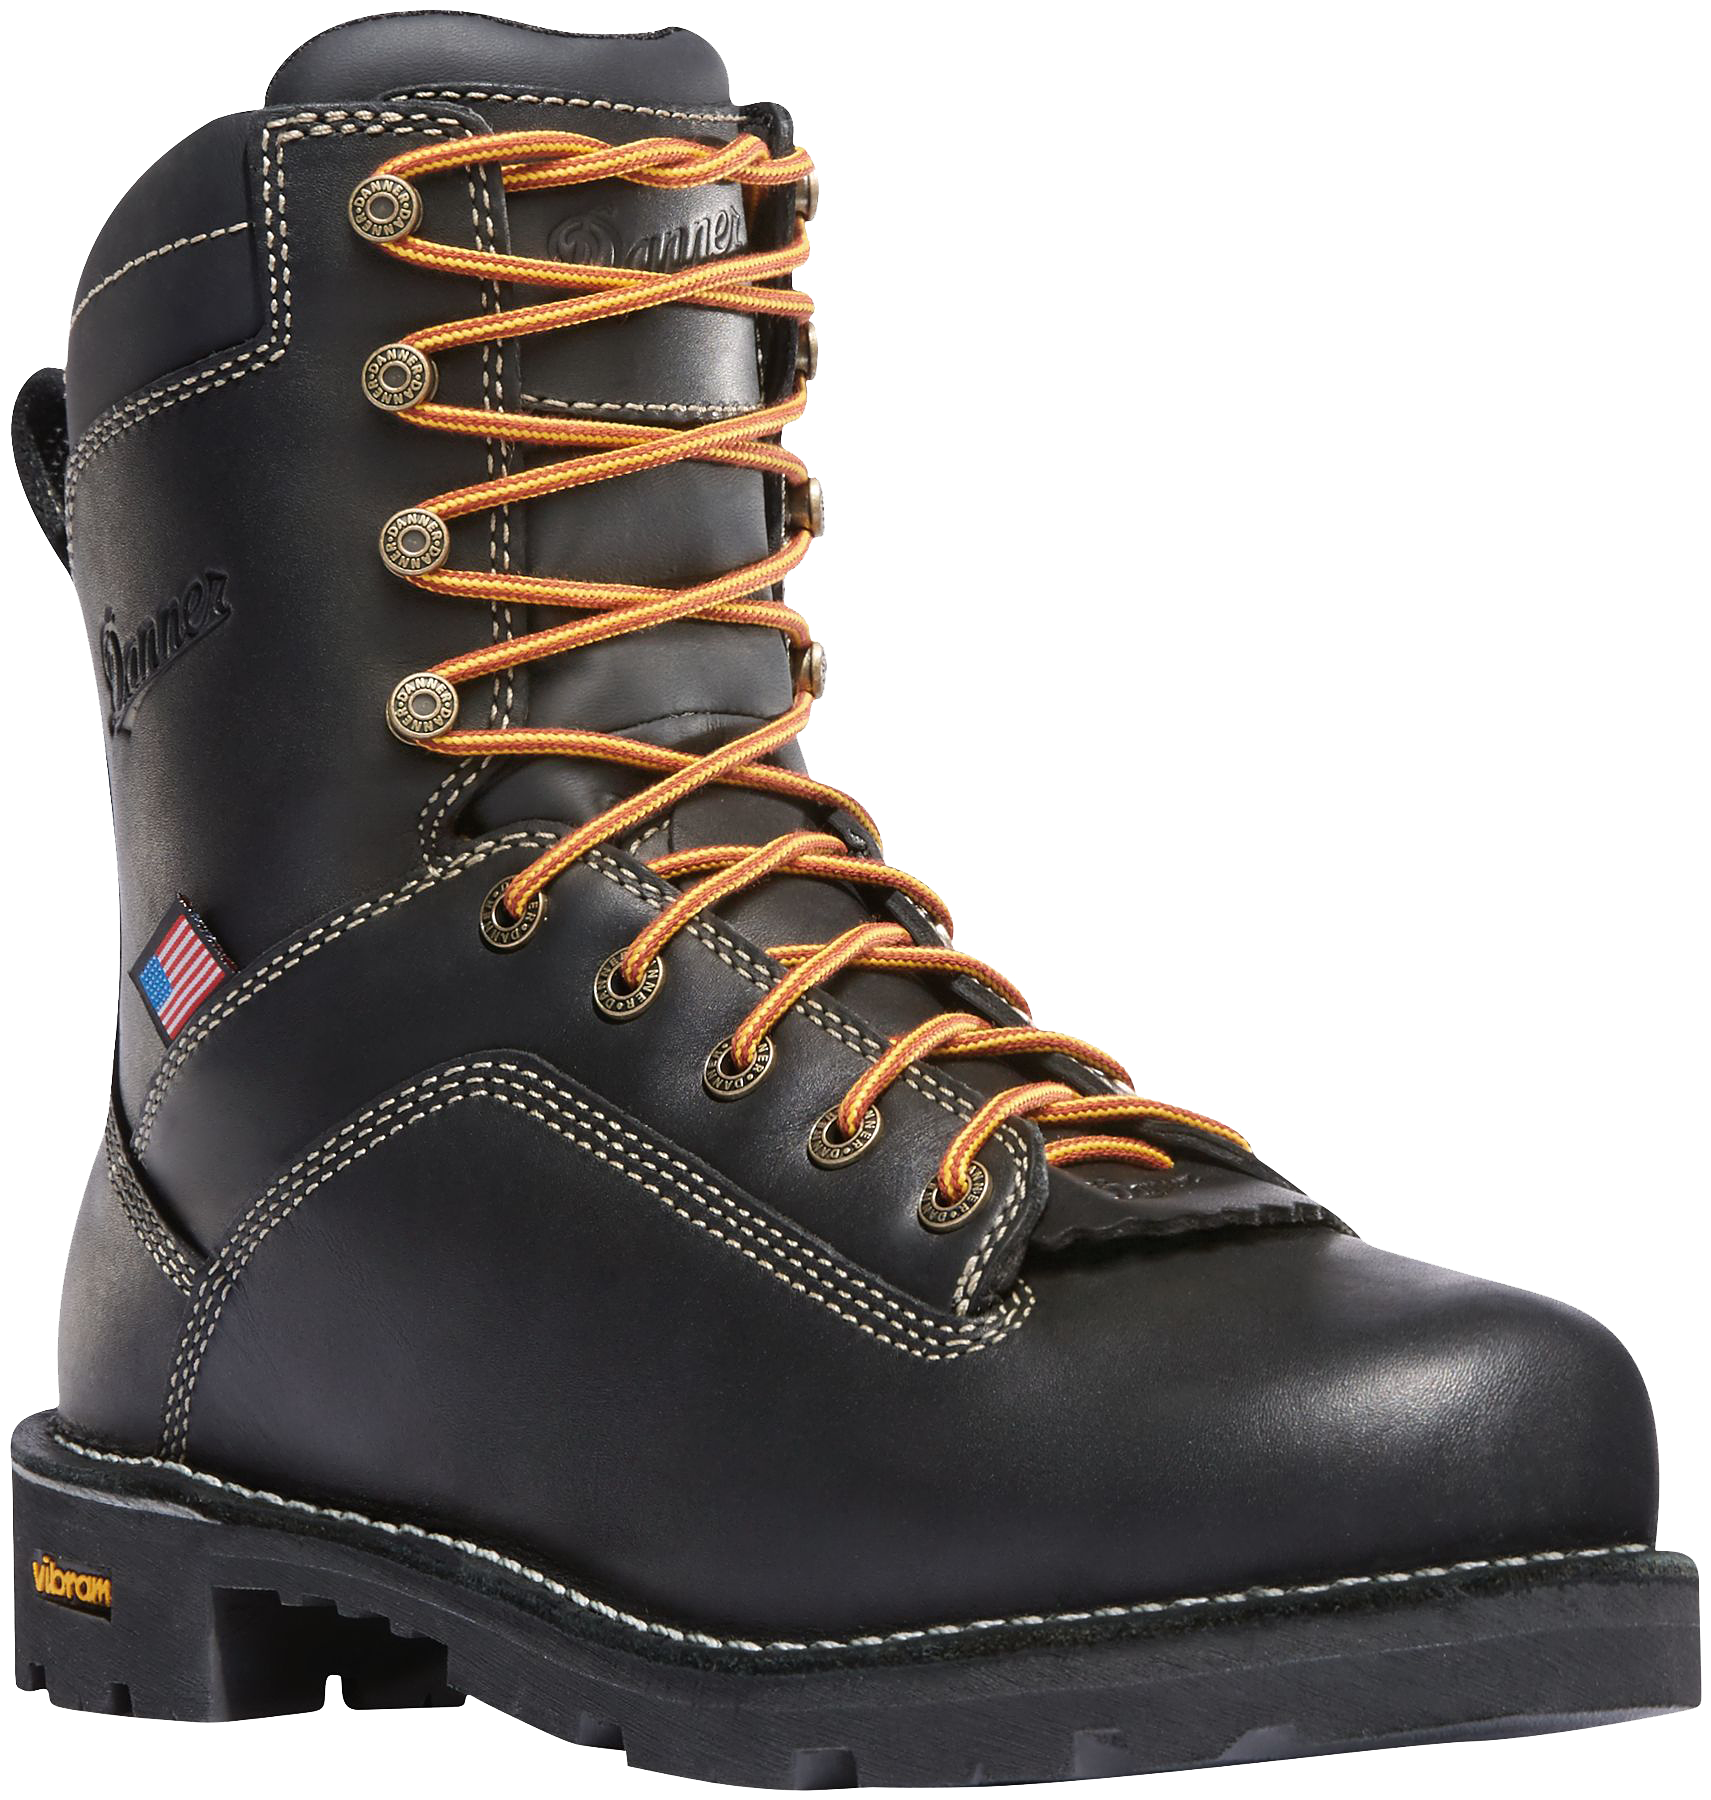 Danner Quarry USA Brown GORE-TEX Alloy Toe Work Boots for Men - Black - 7.5W